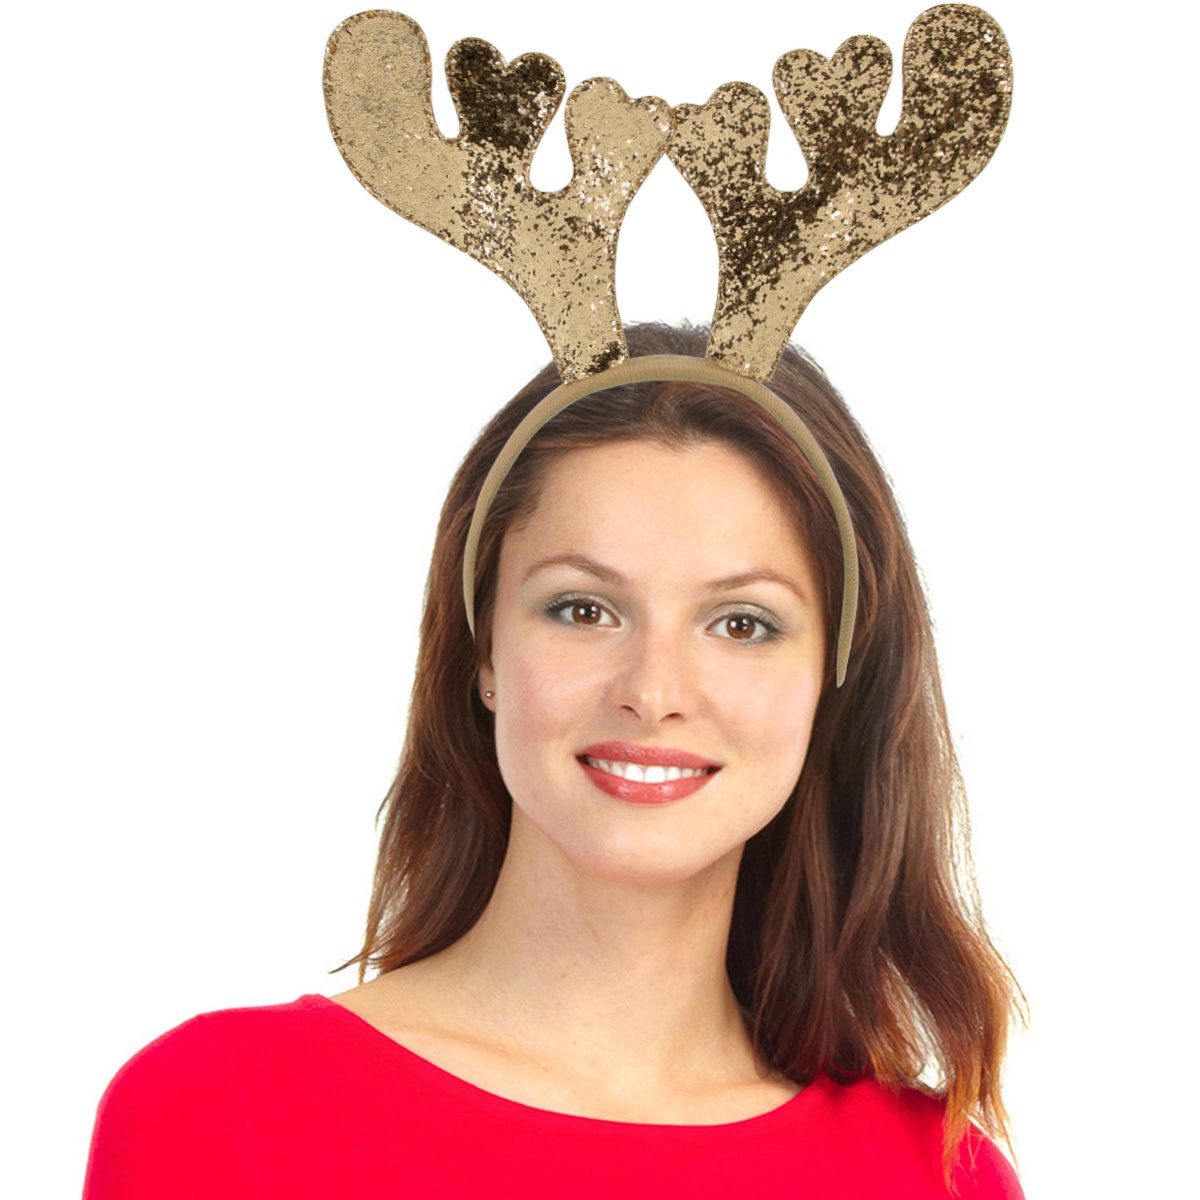 PaperCraft Reindeer Antlers – Holiday Party & Christmas Fun!